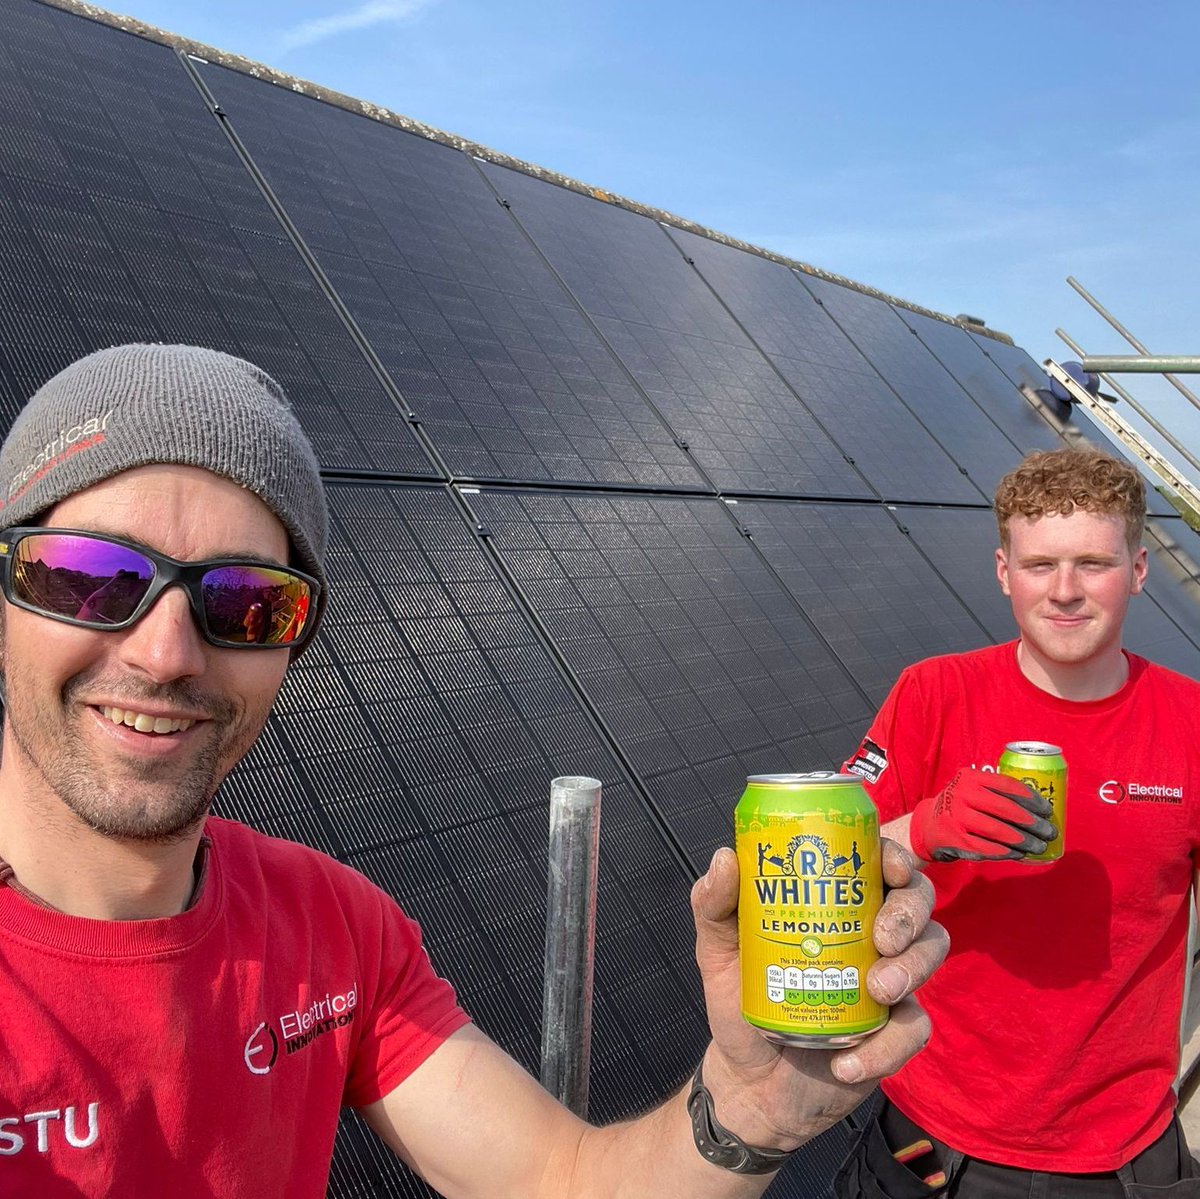 Always thankful for nice cold refreshments from our customers 😊

#SolarPVInstalleroftheyear2023 #solarPV #solarpanels #electricianinderby #chellastonelectrician #derby #electrician #solarbusiness #solarenergy #cleanenergy #solarpvsystem #energysolutions #solarpower